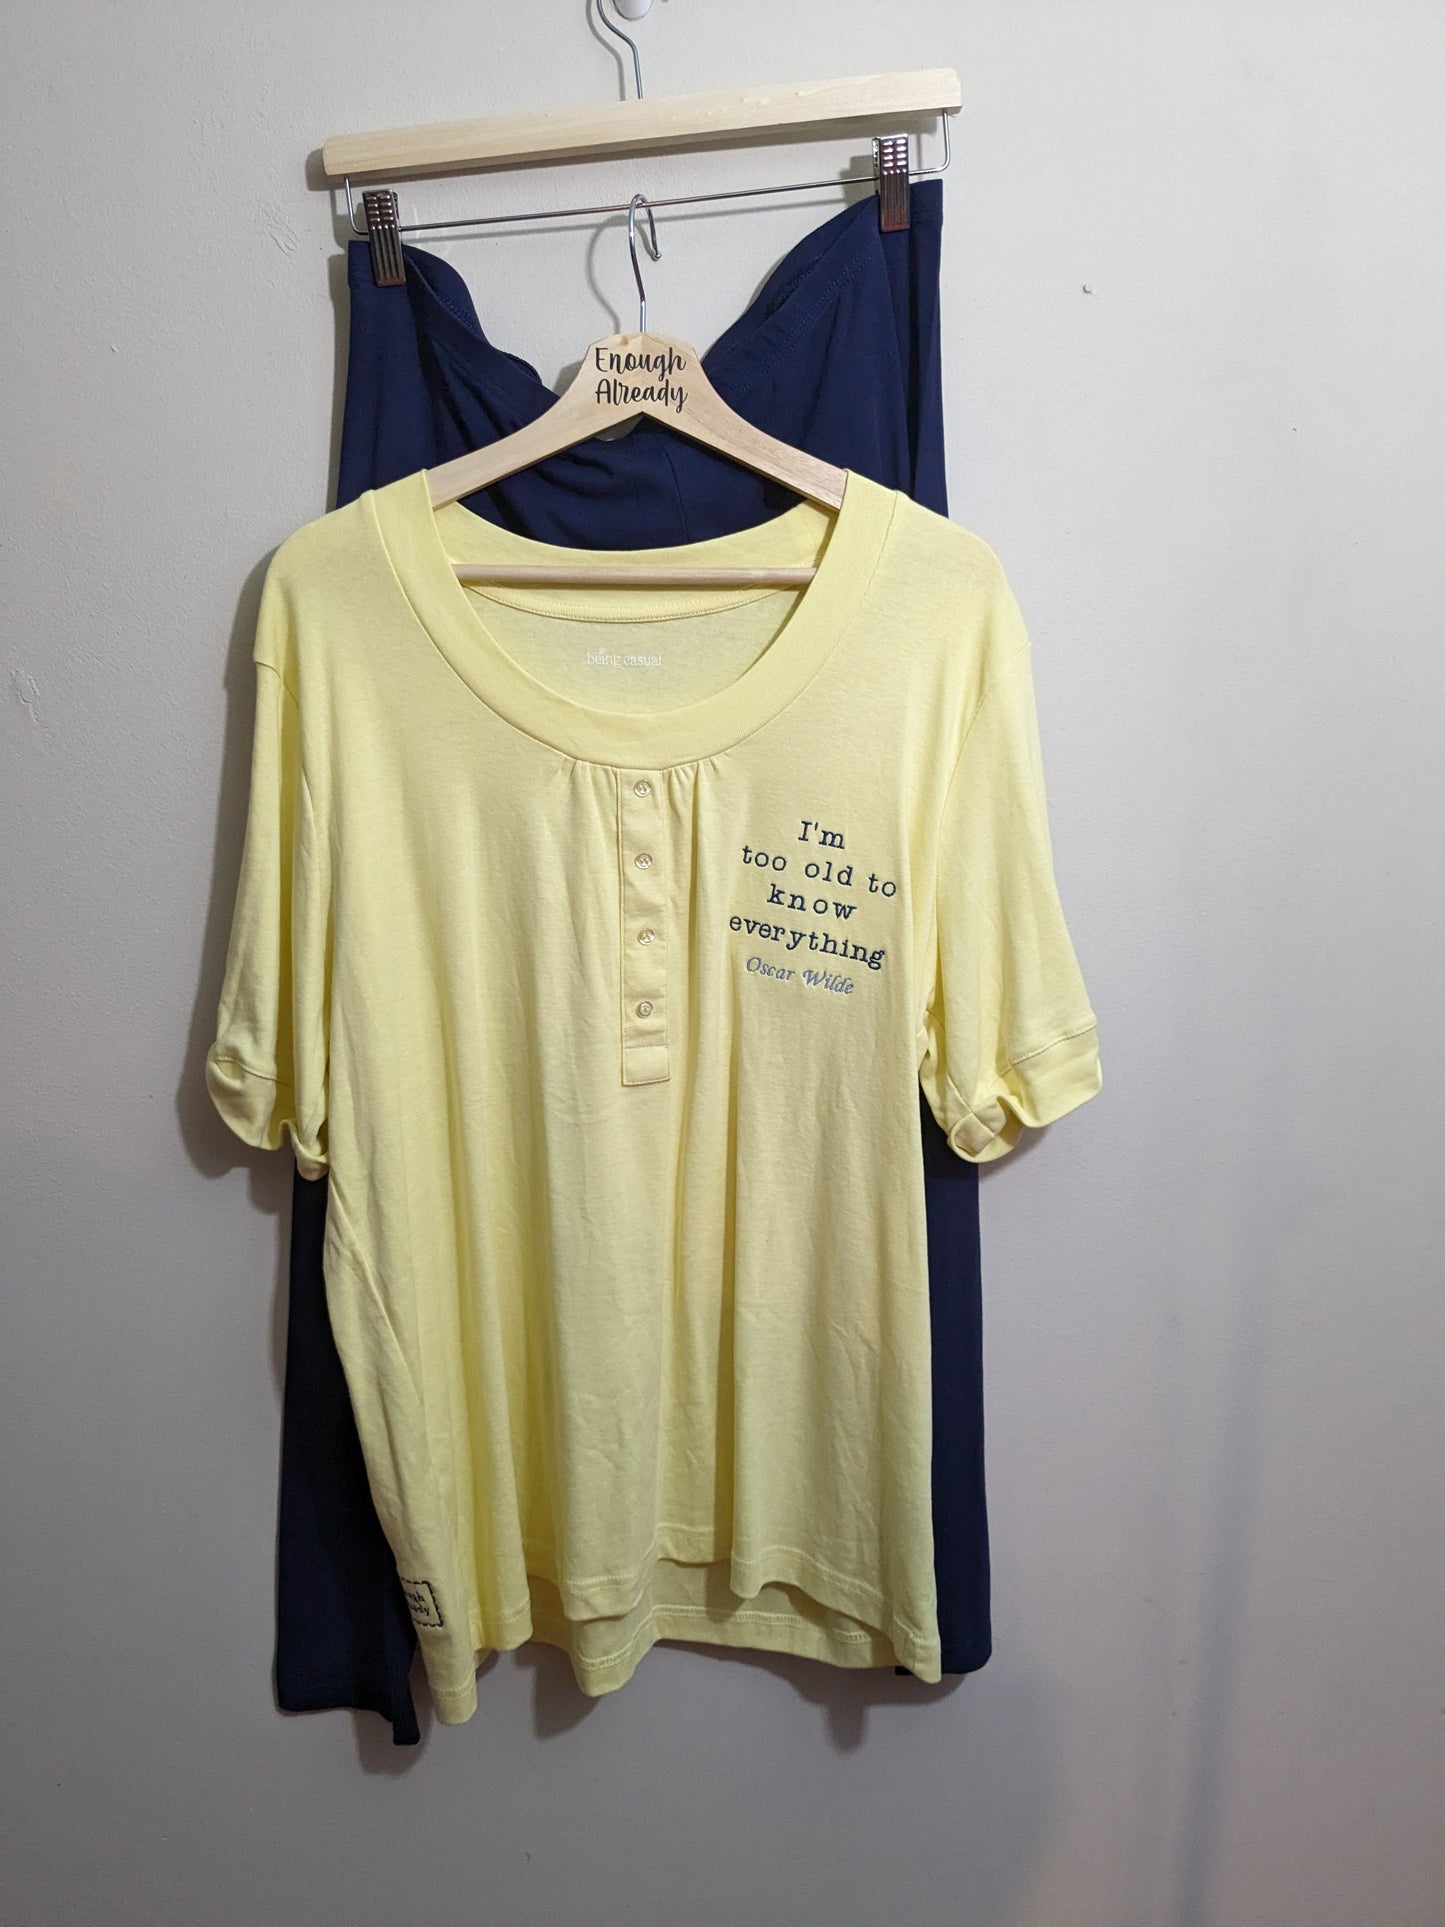 Size 20/22 Reworked Loungewear Set - Lemon Yellow & Navy - Embroidered Oscar Wilde Bookish Quote